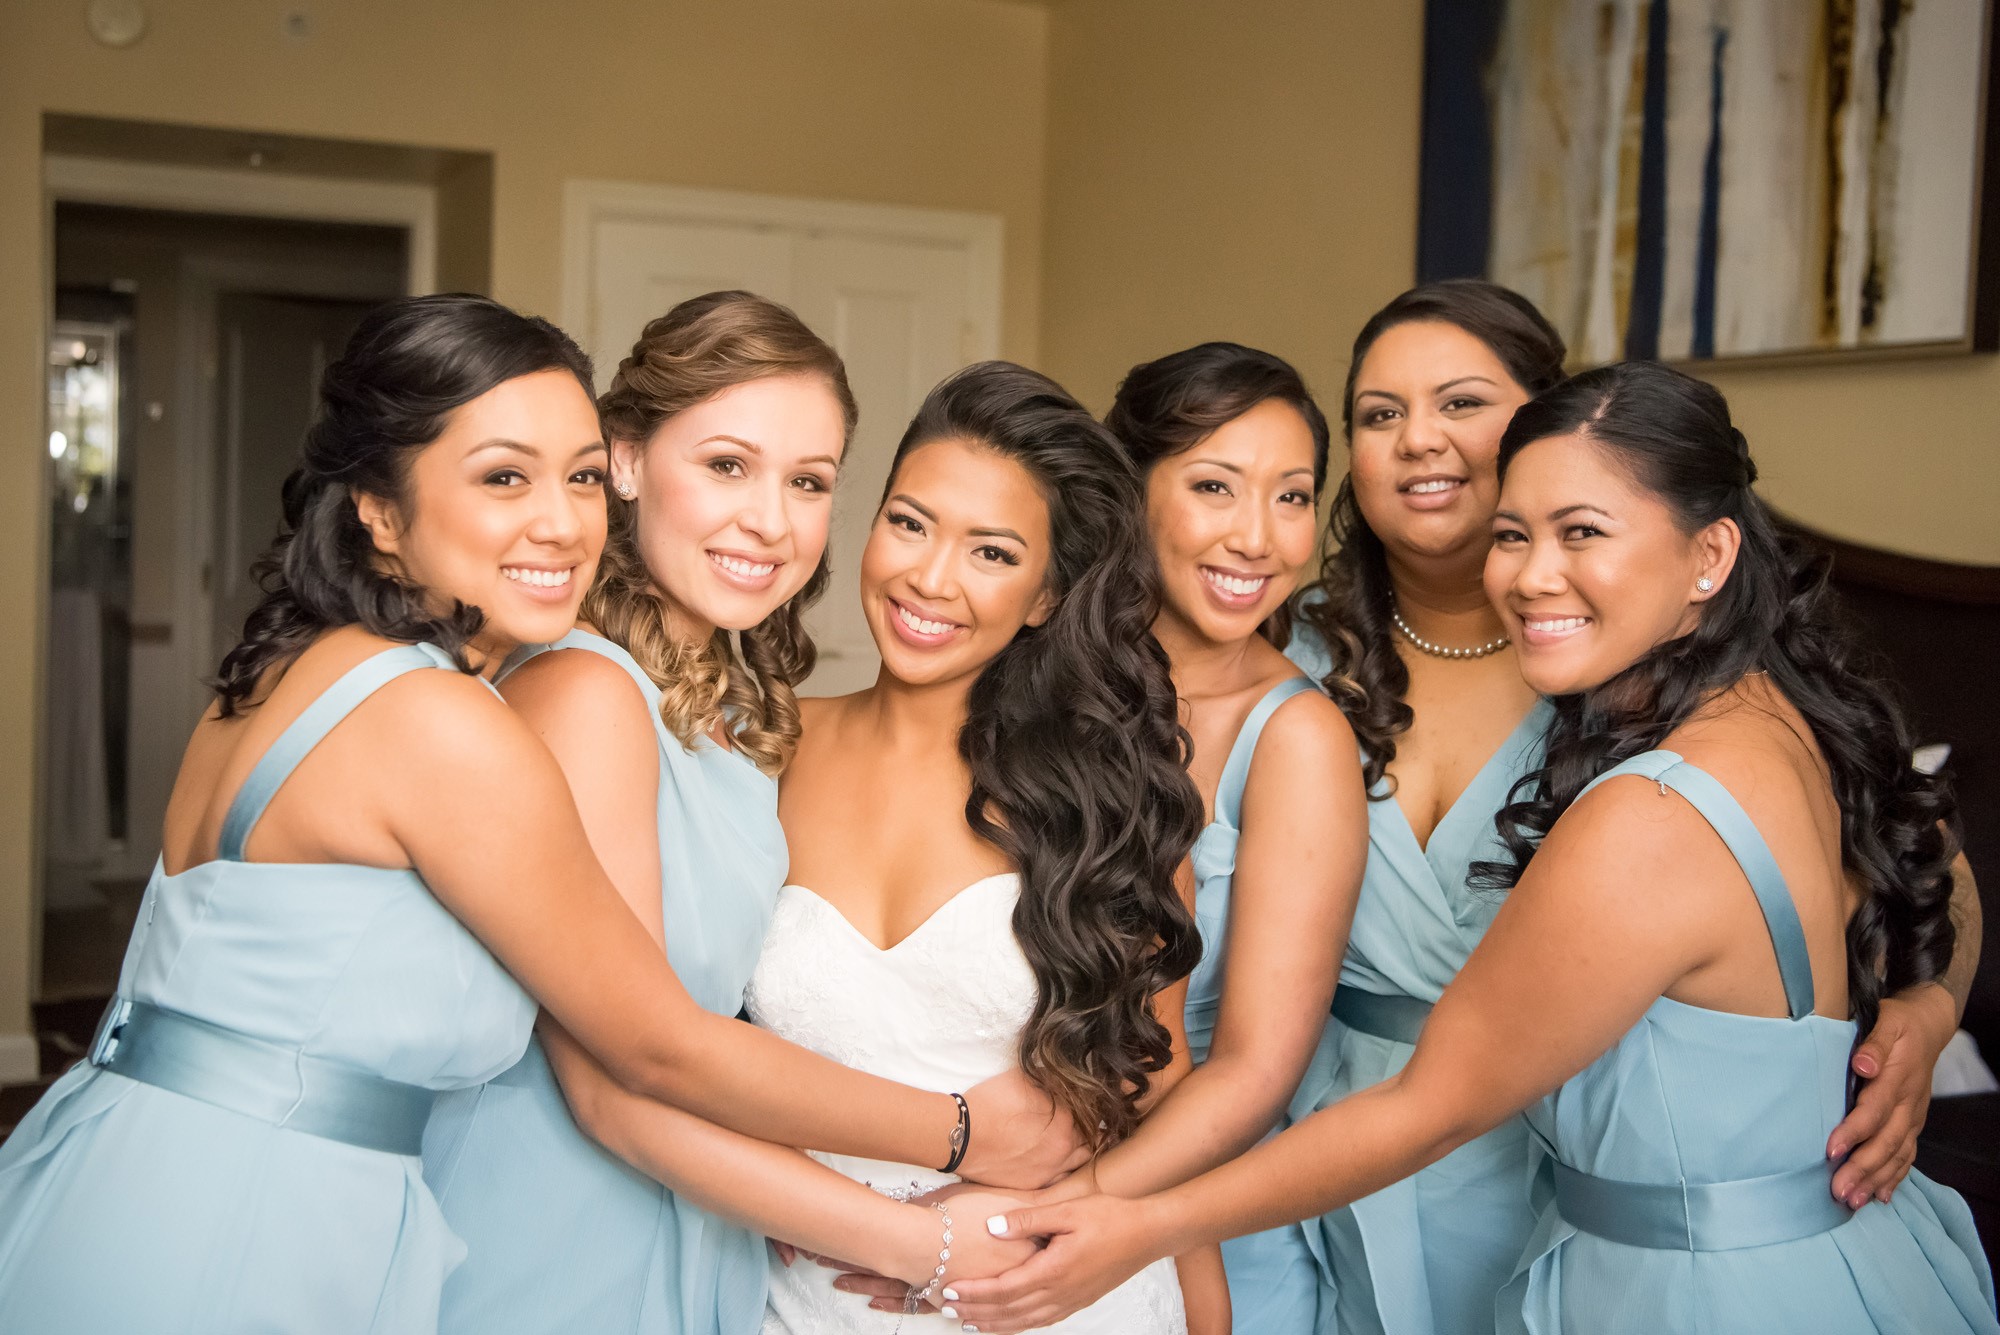 Wedding Party Photos, Download The BEST Free Wedding Party Stock